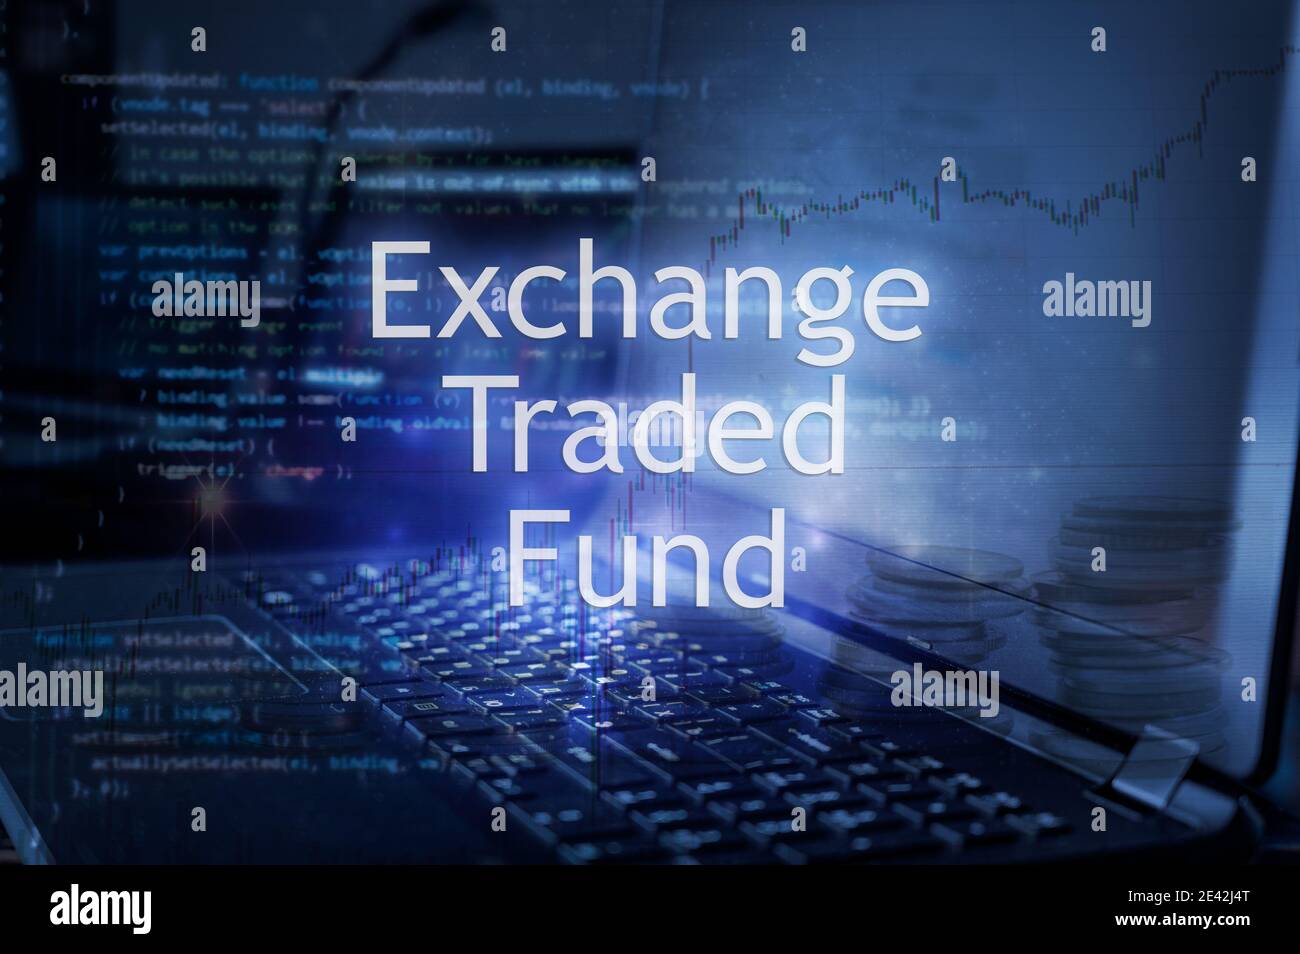 Exchange traded fund inscription against laptop and code background. Financial concept. Stock Photo